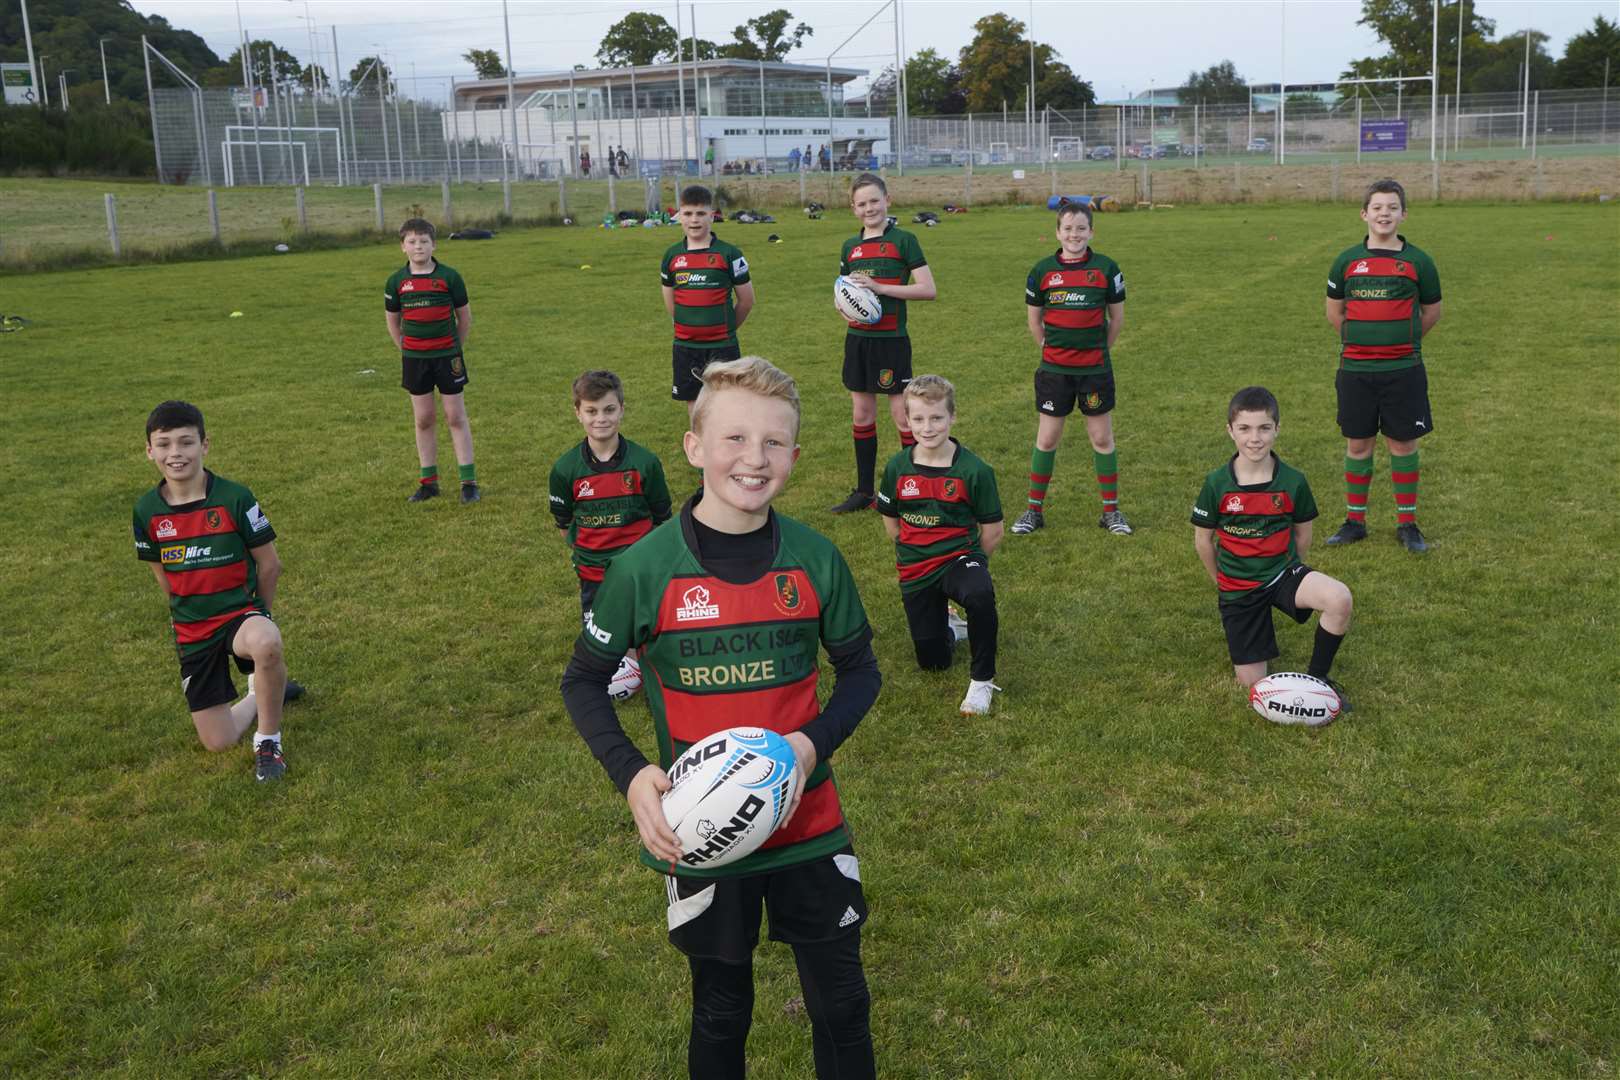 Aldi and Highland Rugby Club sponsorship. LtoR Graham Findlater, President HRC, Neil Malcolm, Aldi and Brian Knowles, Lead Coach Watching the U-13 training session. Front of photo Lachie Sangster (11) and Neil Malcom of Aldi.